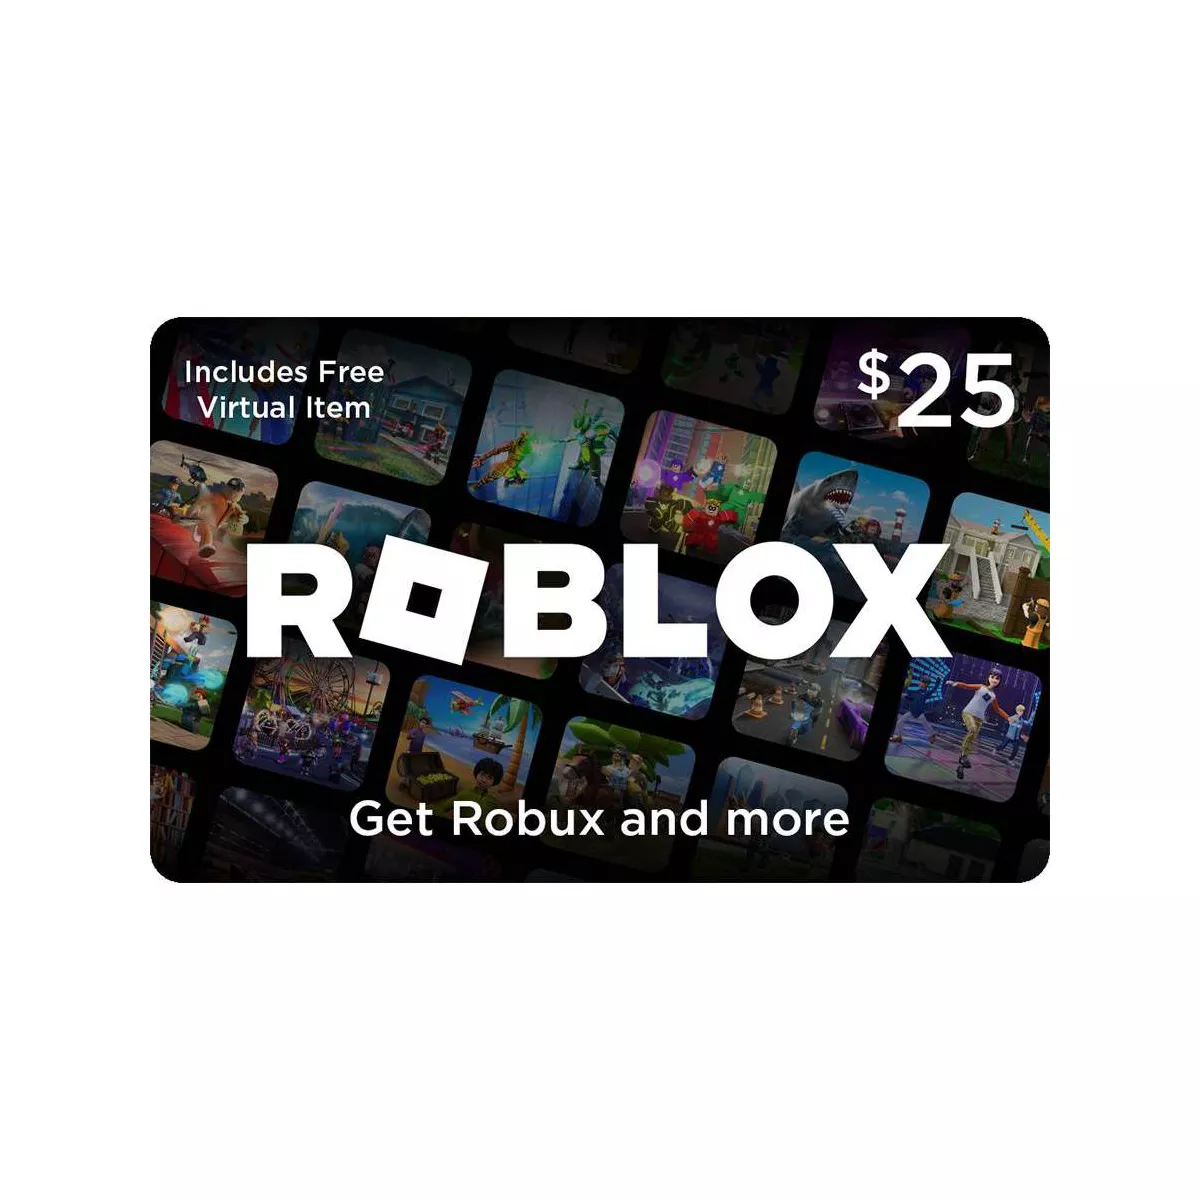 Unlocking Fun: How Much Robux Can You Get with a $25 Gift Card?